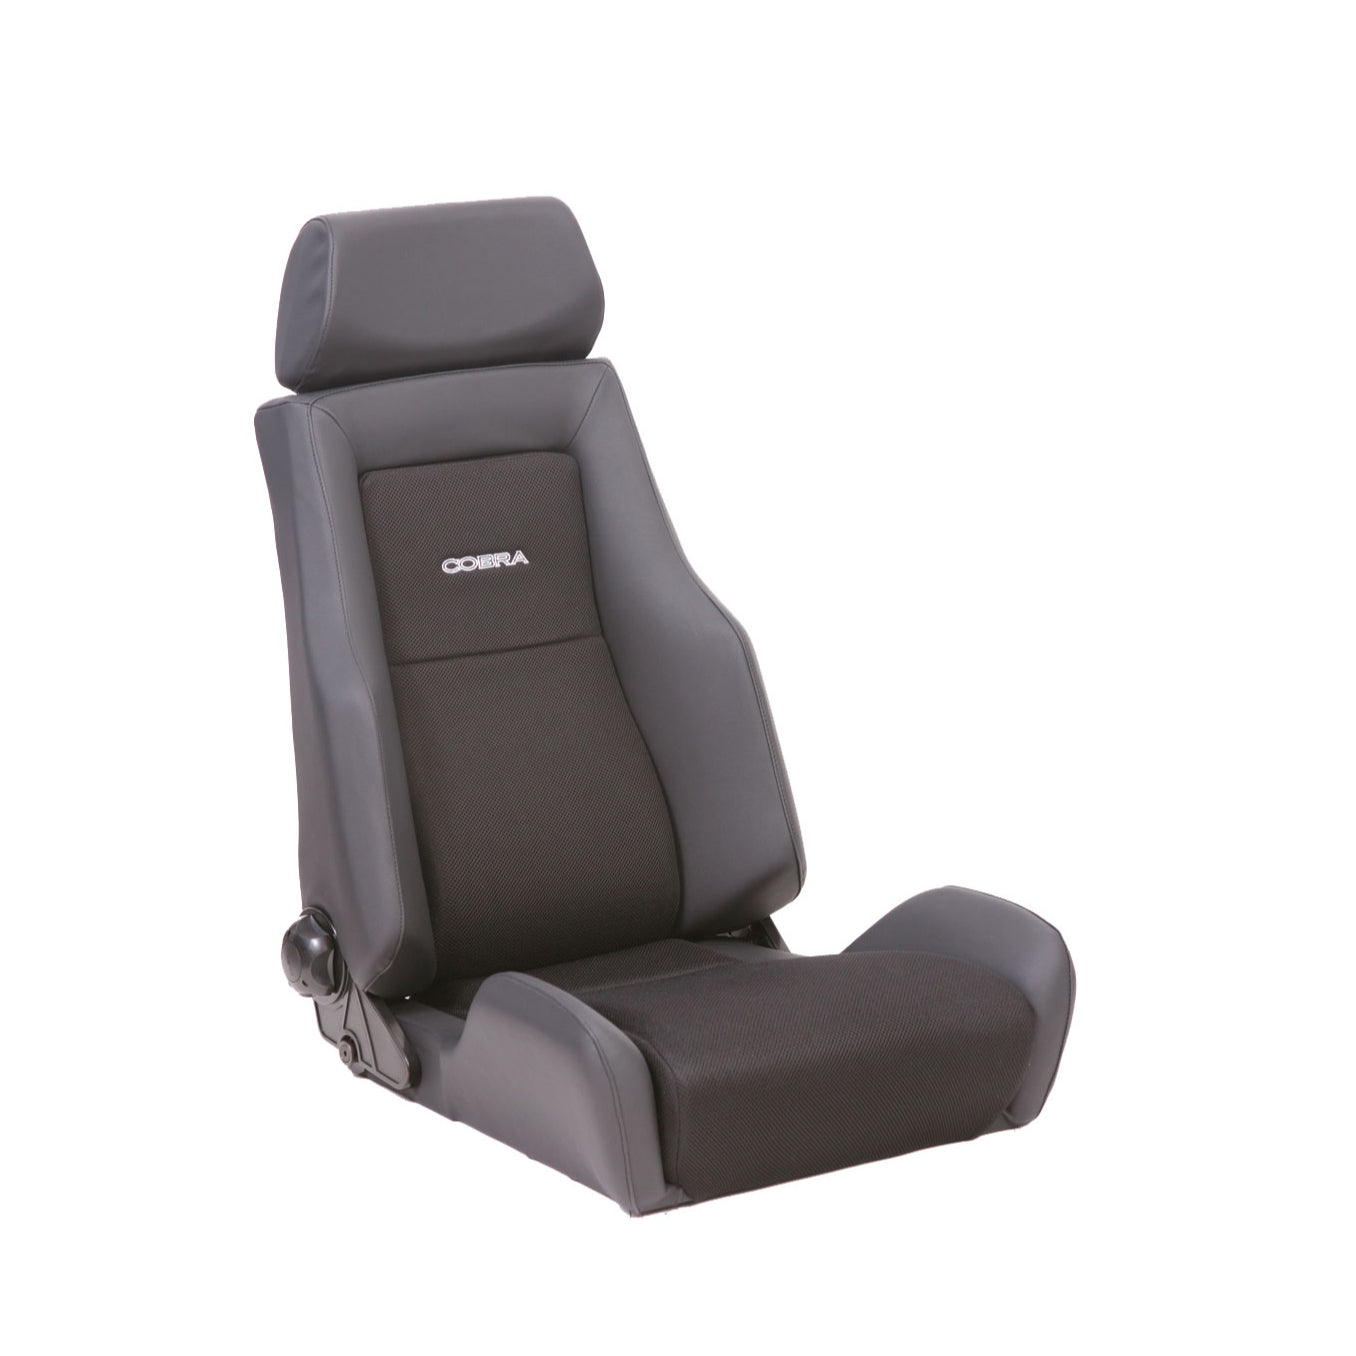 Lemans Seat: 4 different styles